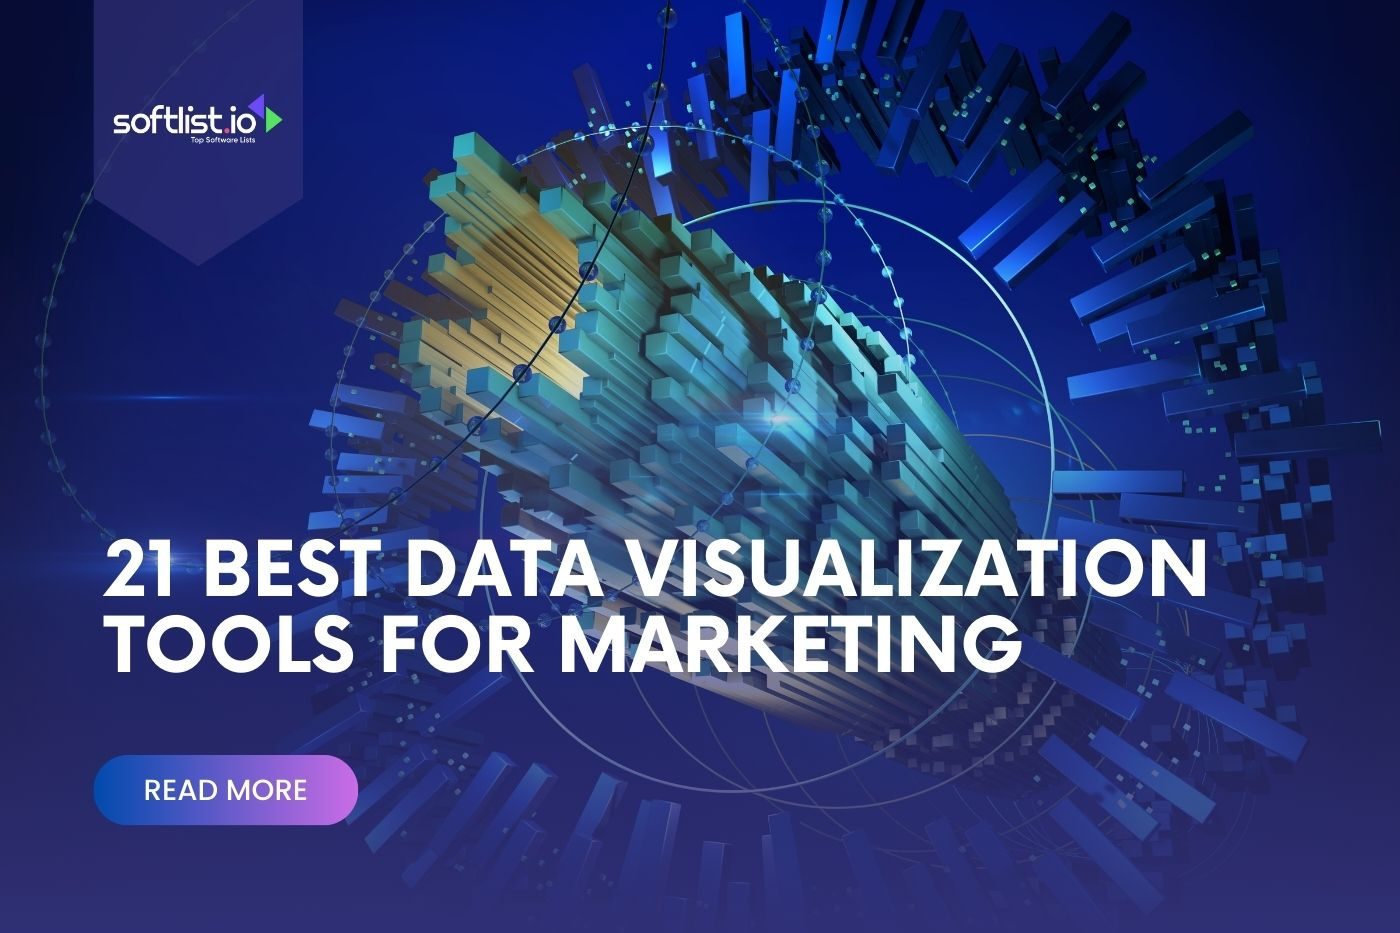 21 Best Data Visualization Tools for Marketing